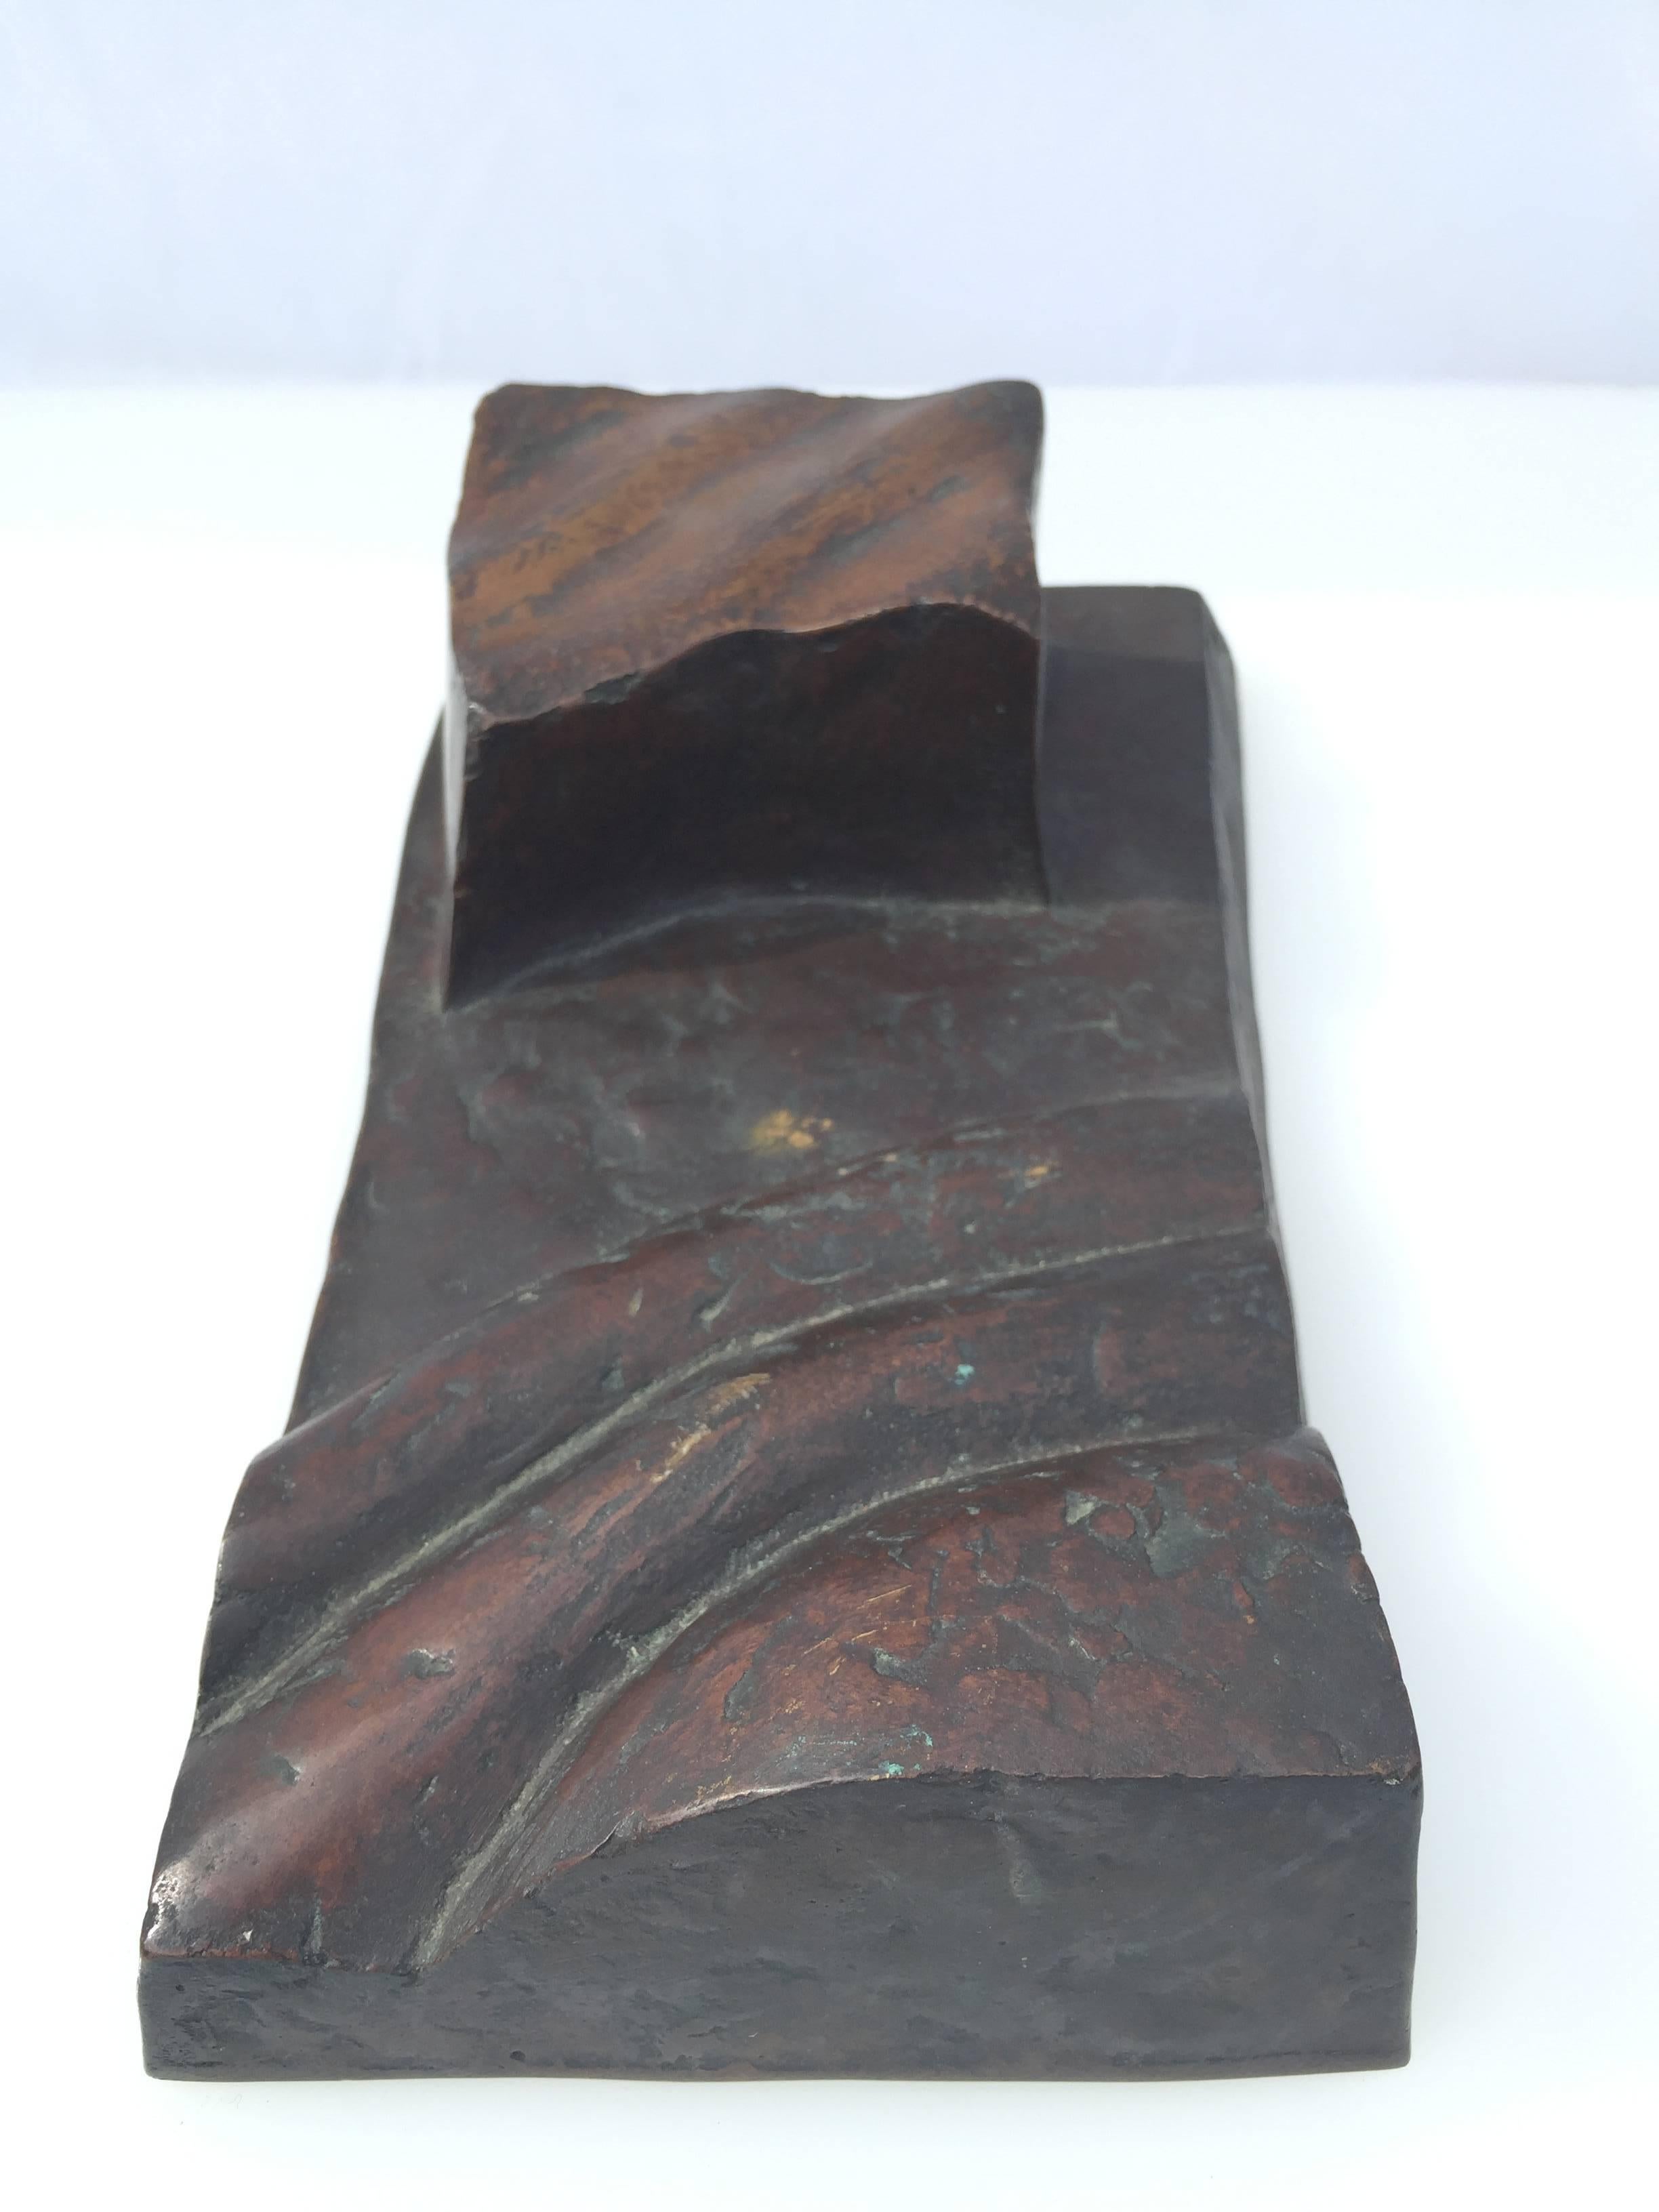 An amazing abstract bronze by German artist Maximilian Hutlett. Signed on the bottom, Hutlett 1983 2/10 Casting Room Cave and on a piece of tape See Stick III 2/10. 

From the Maximilian Hutlett catalog: 
Maximilian Hutlett. 
Plastic signs and